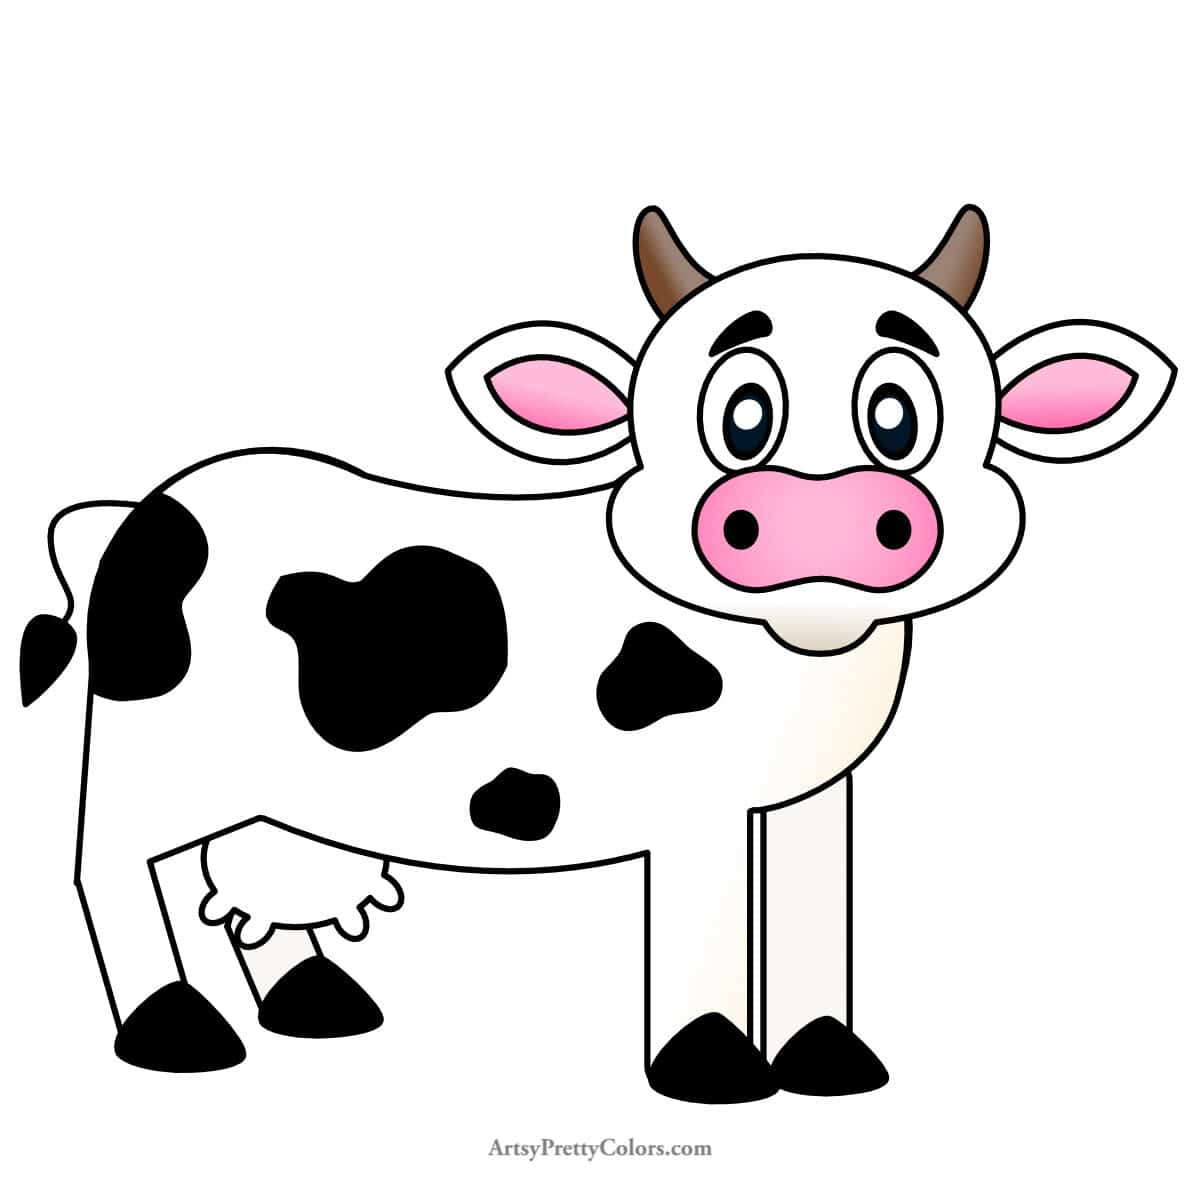 a cute cow with a pink nose and ears and black spots